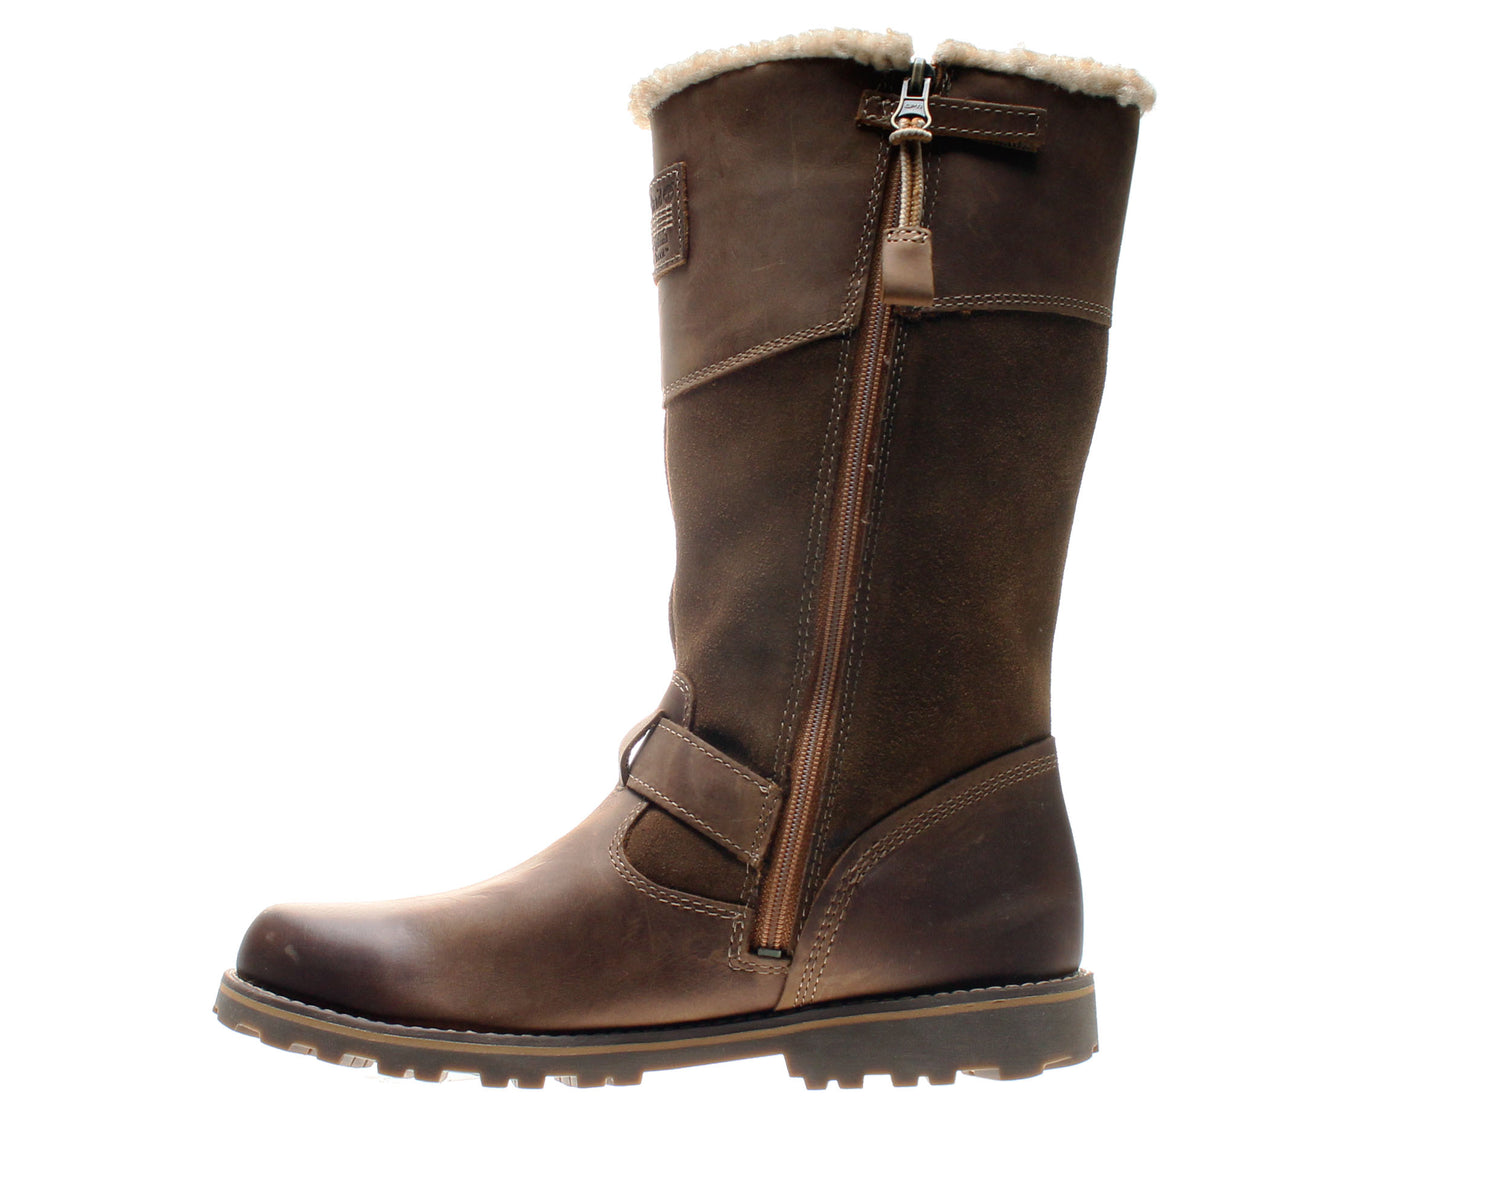 Timberland Earthkeepers Skyhaven Shearling Tall Junior Girls Boots